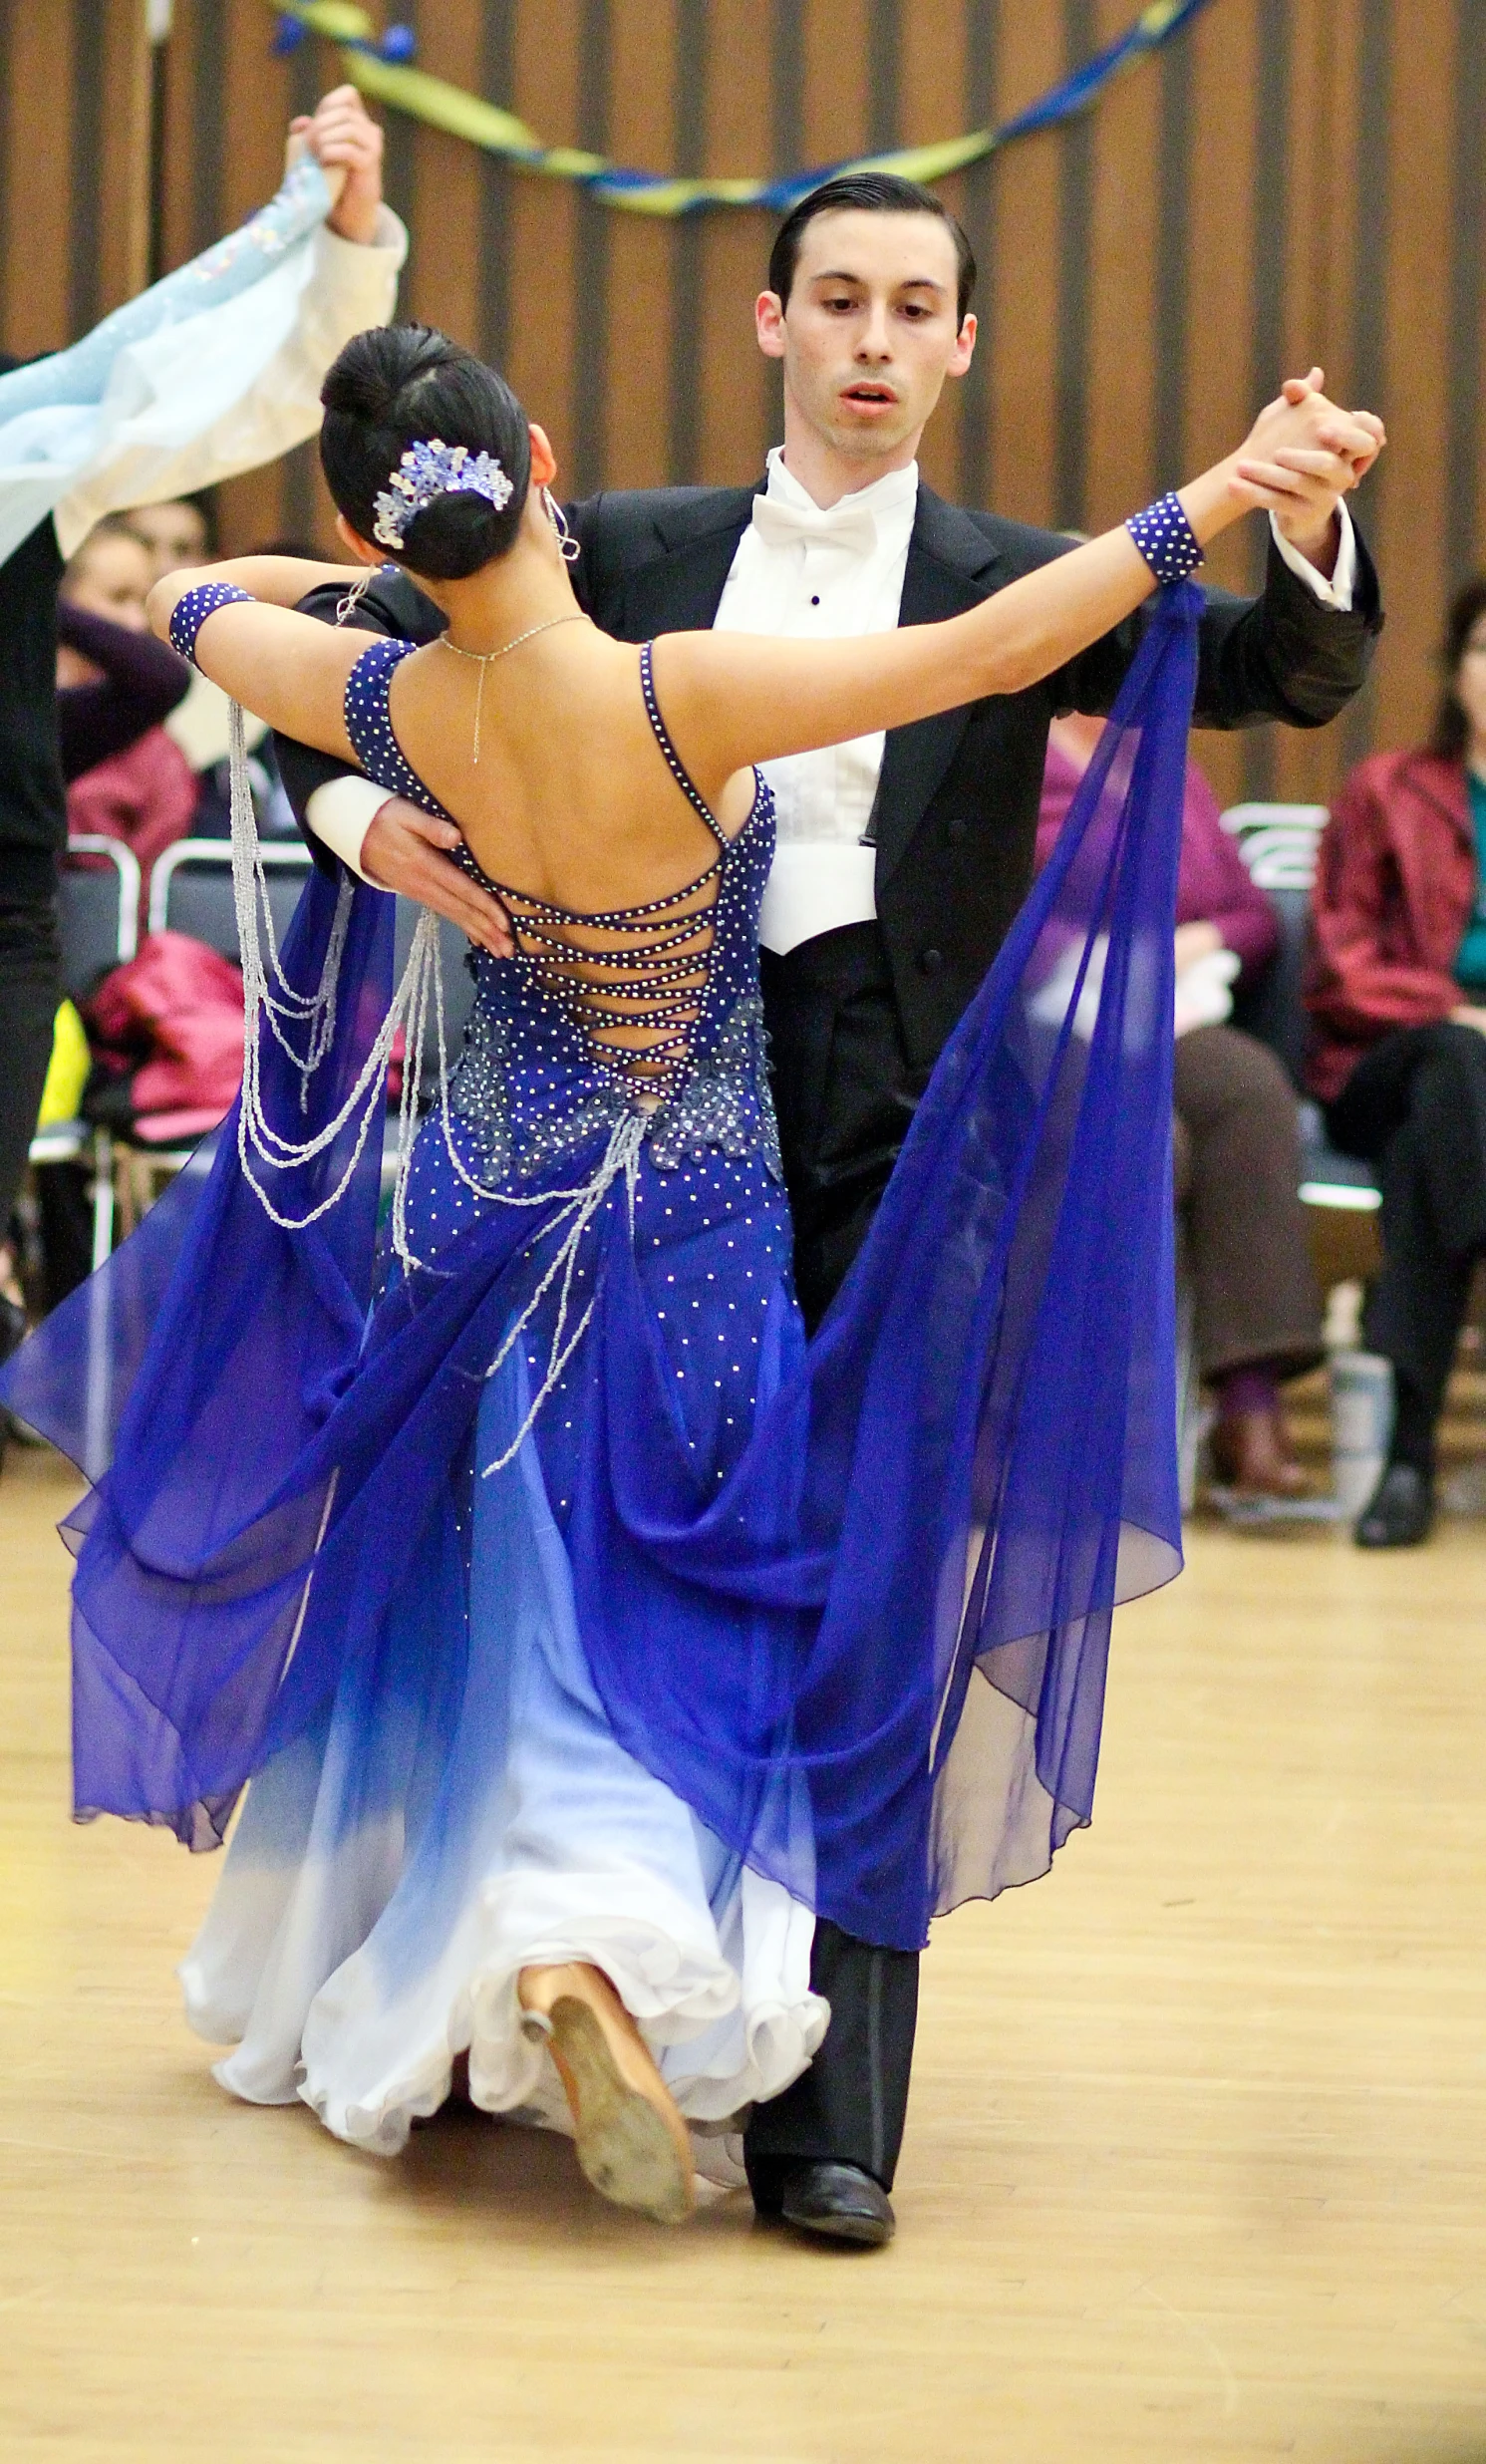 two ballroom dancers in front of a crowd